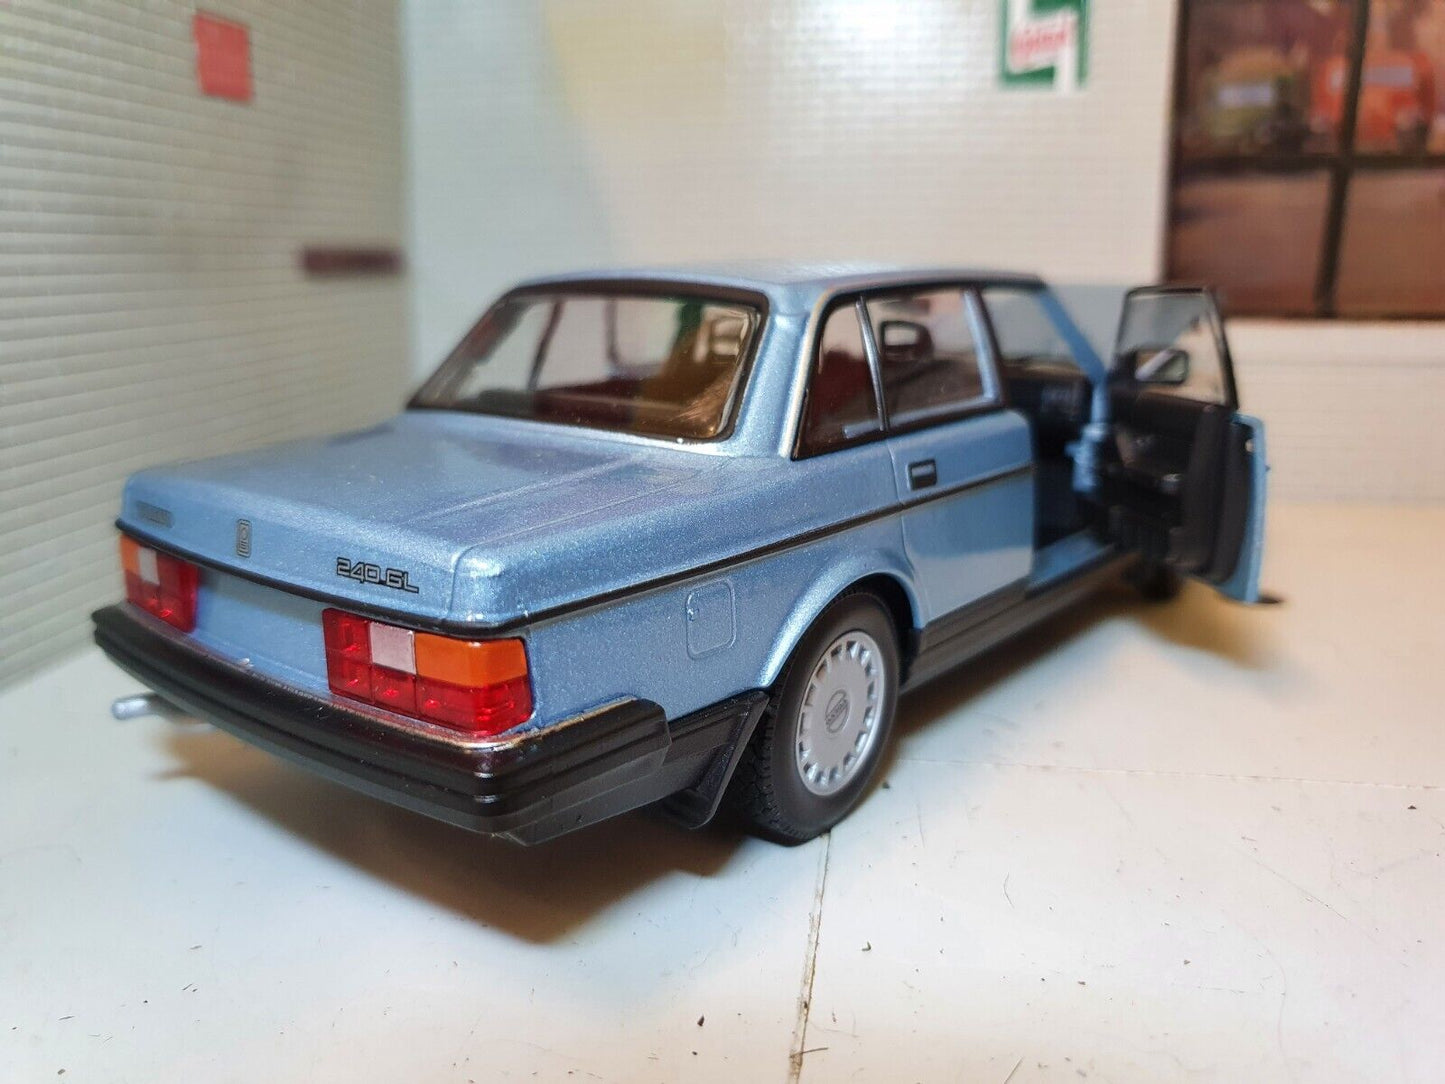 Volvo 240 GL 1986 Saloon 24102 Welly 1:24